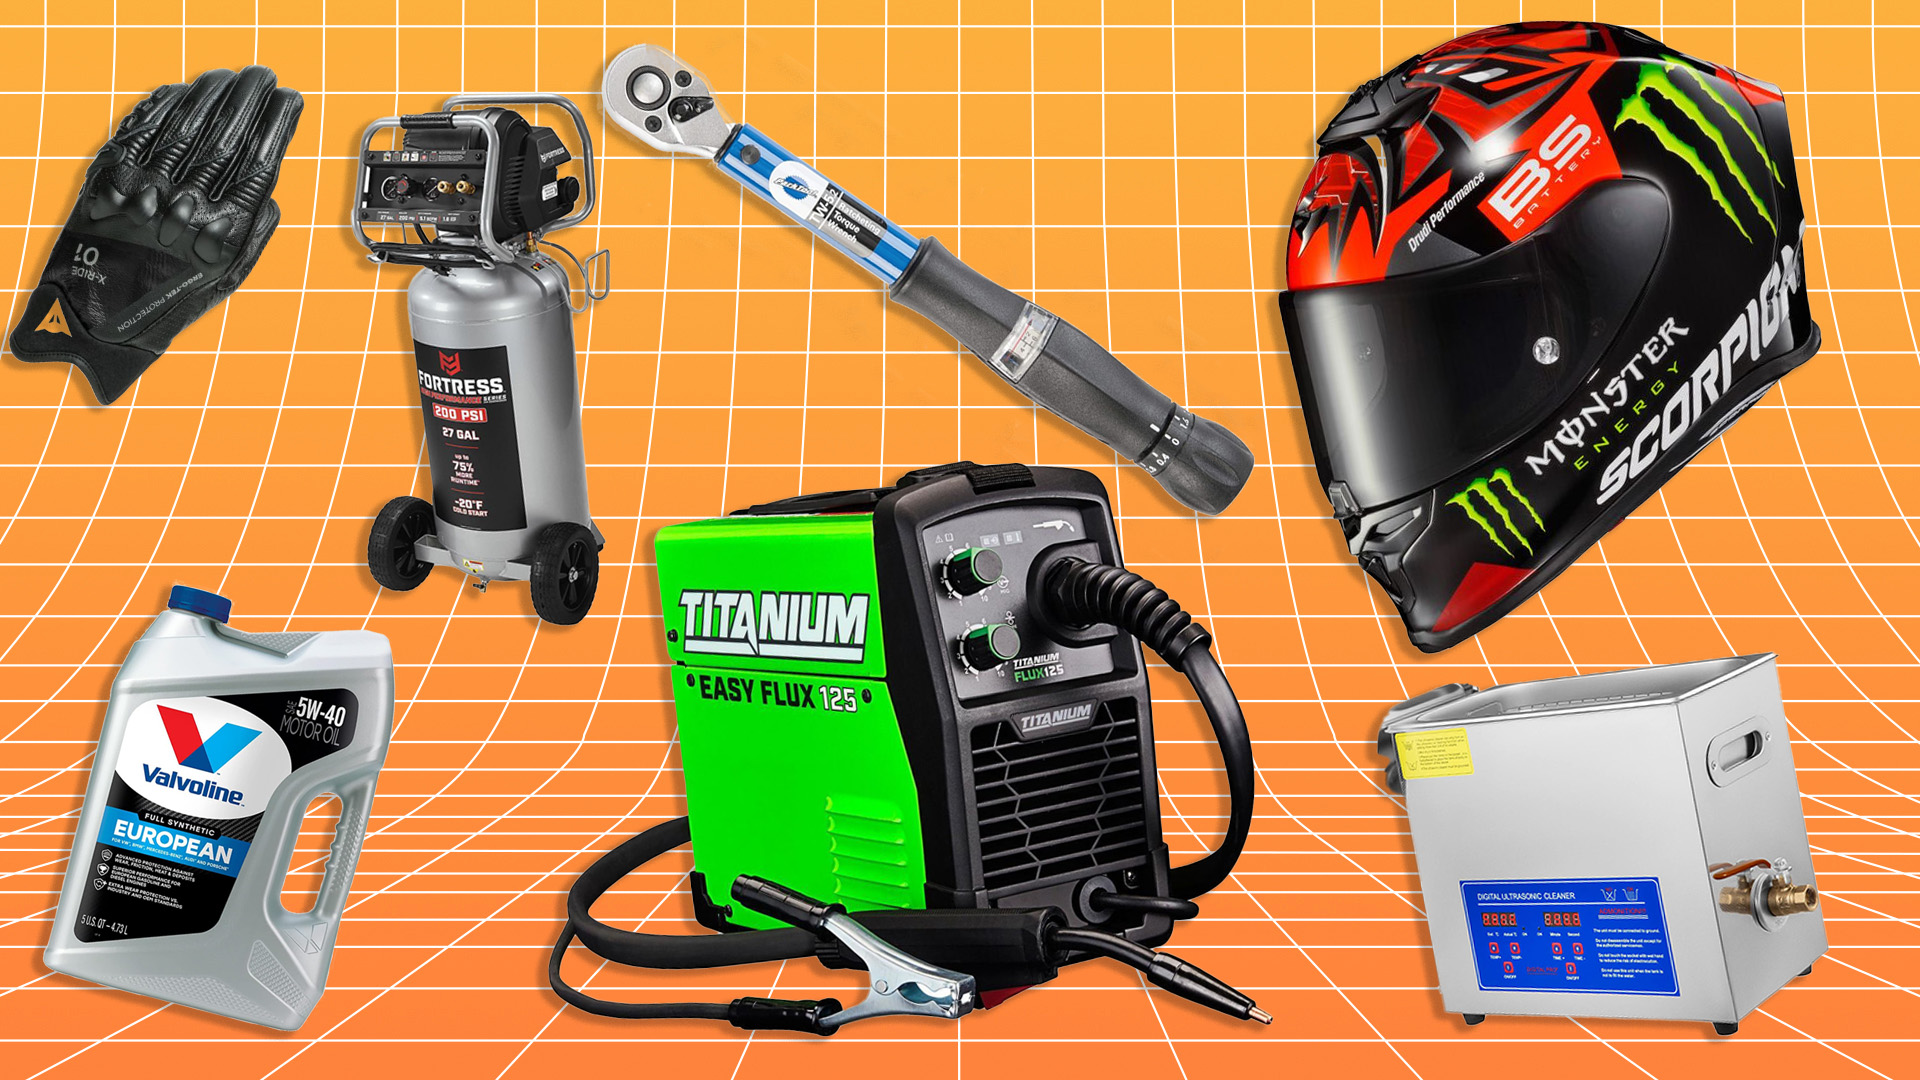 Weekly Deals: Stellar Savings On Our Favorite Tools, Parts, and Accessories for Car Enthusiasts